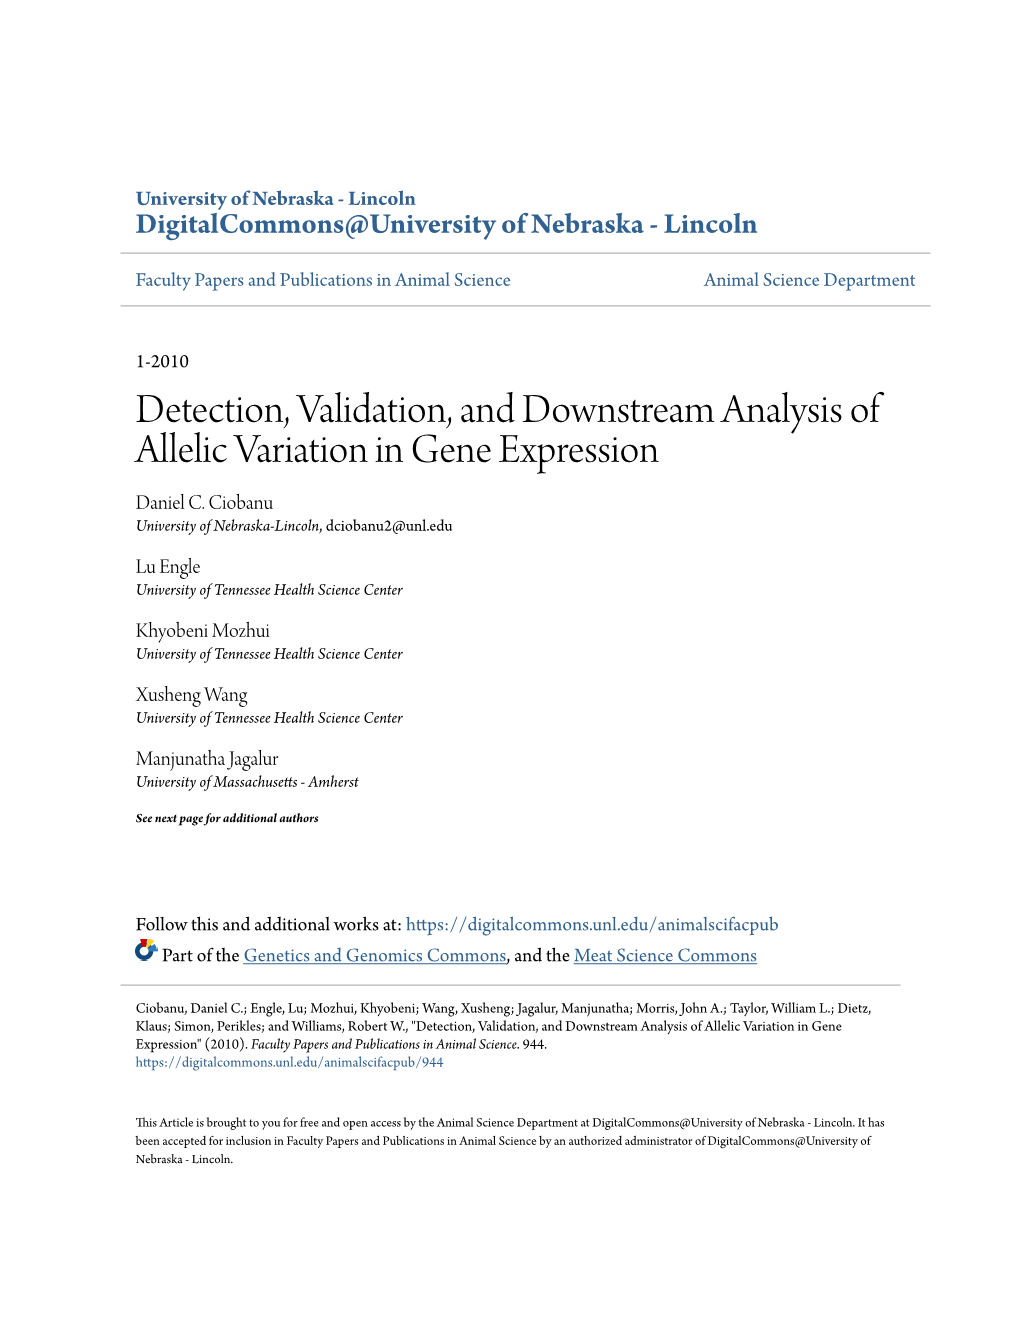 Detection, Validation, and Downstream Analysis of Allelic Variation in Gene Expression Daniel C